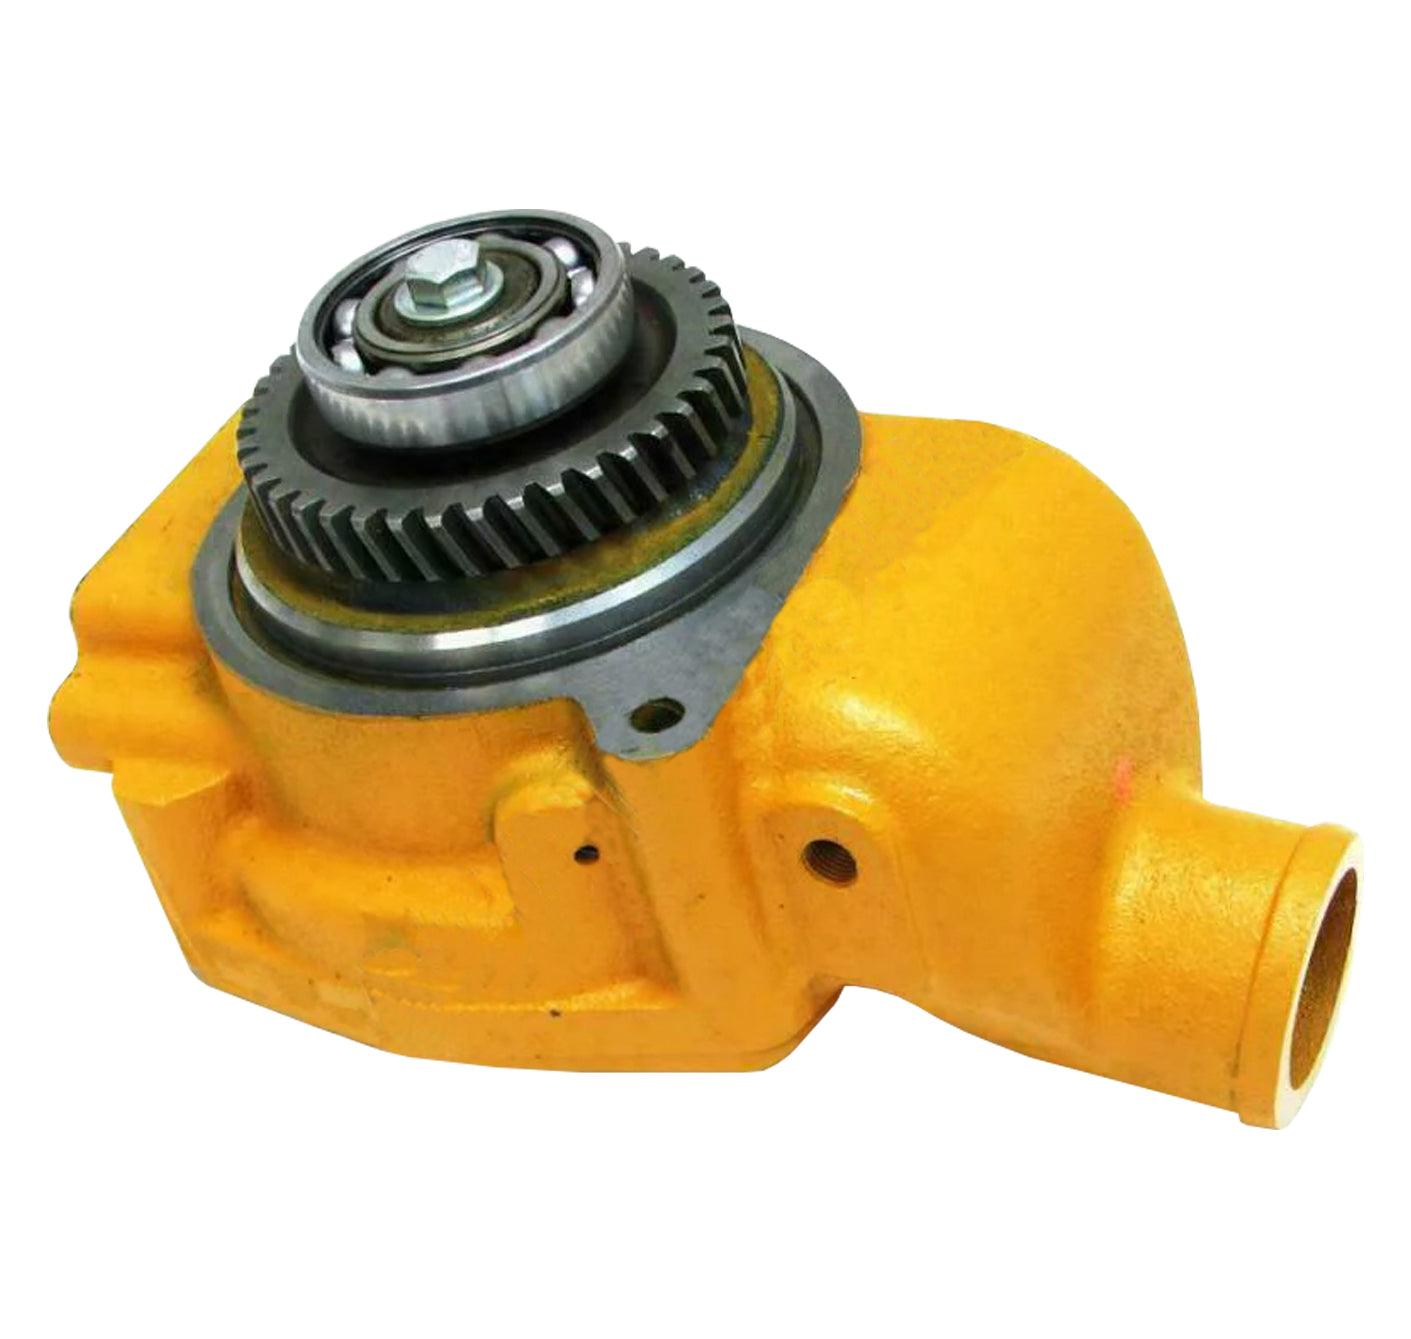 381804 0R1364 0R1003 Pai® Engine Water Pump For Cat Caterpillar 3304 3306 - ADVANCED TRUCK PARTS